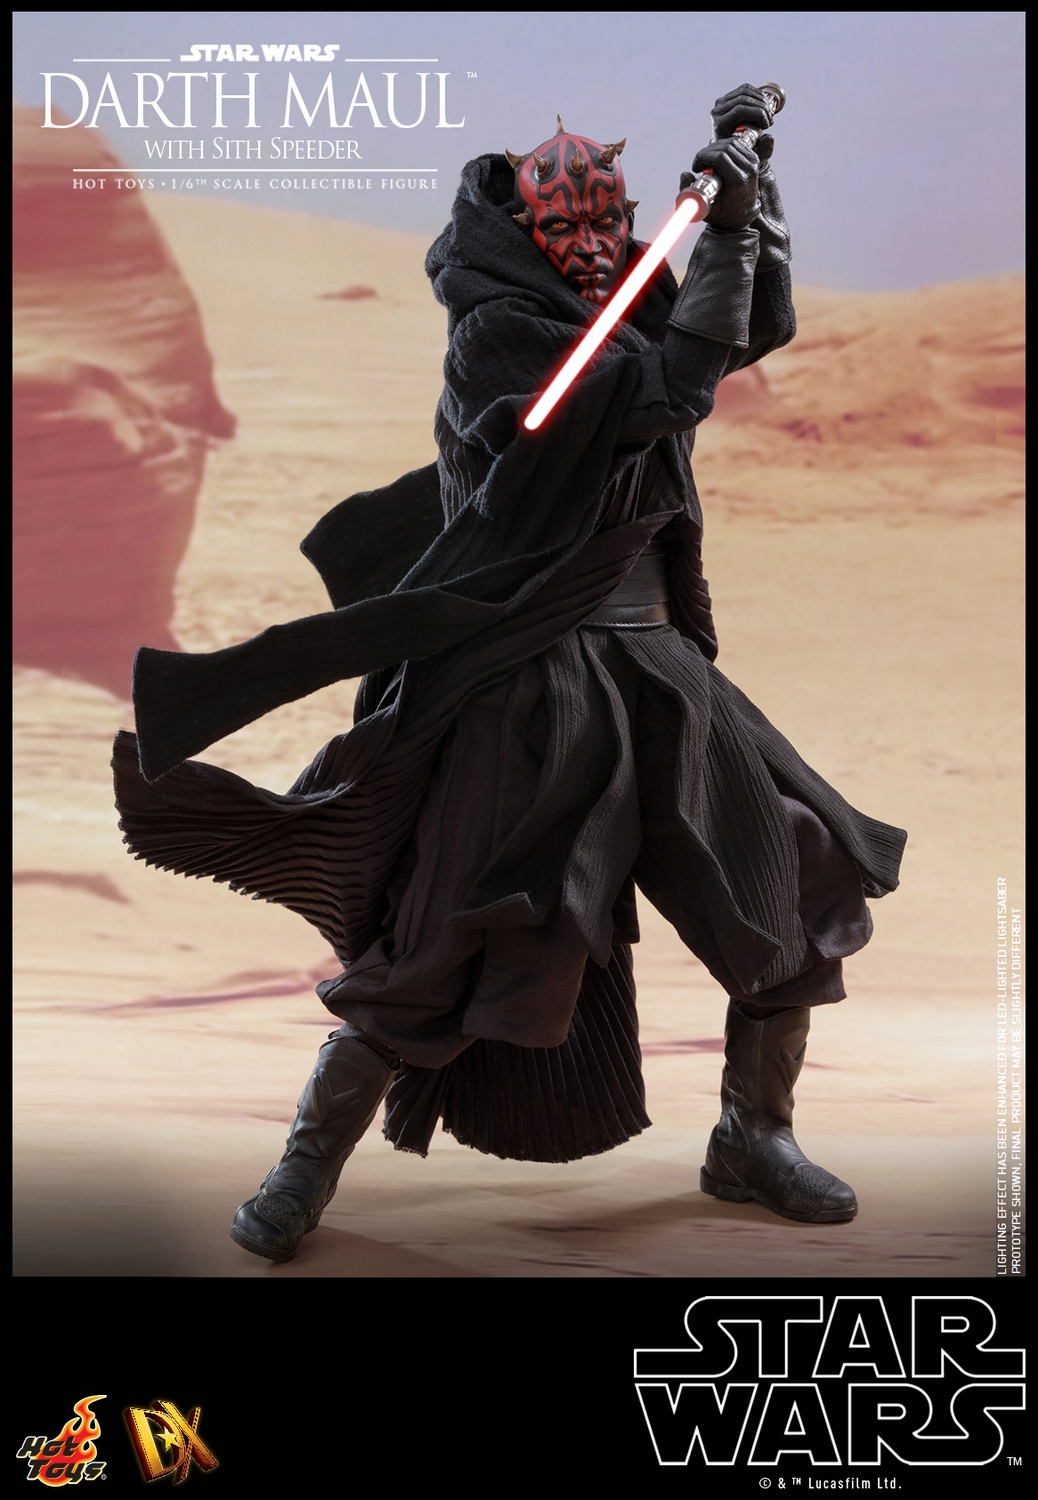 hot-toys-star-wars-1-6-darth-maul-with-sith-speeder-dx17-collectible-figure-029.jpg